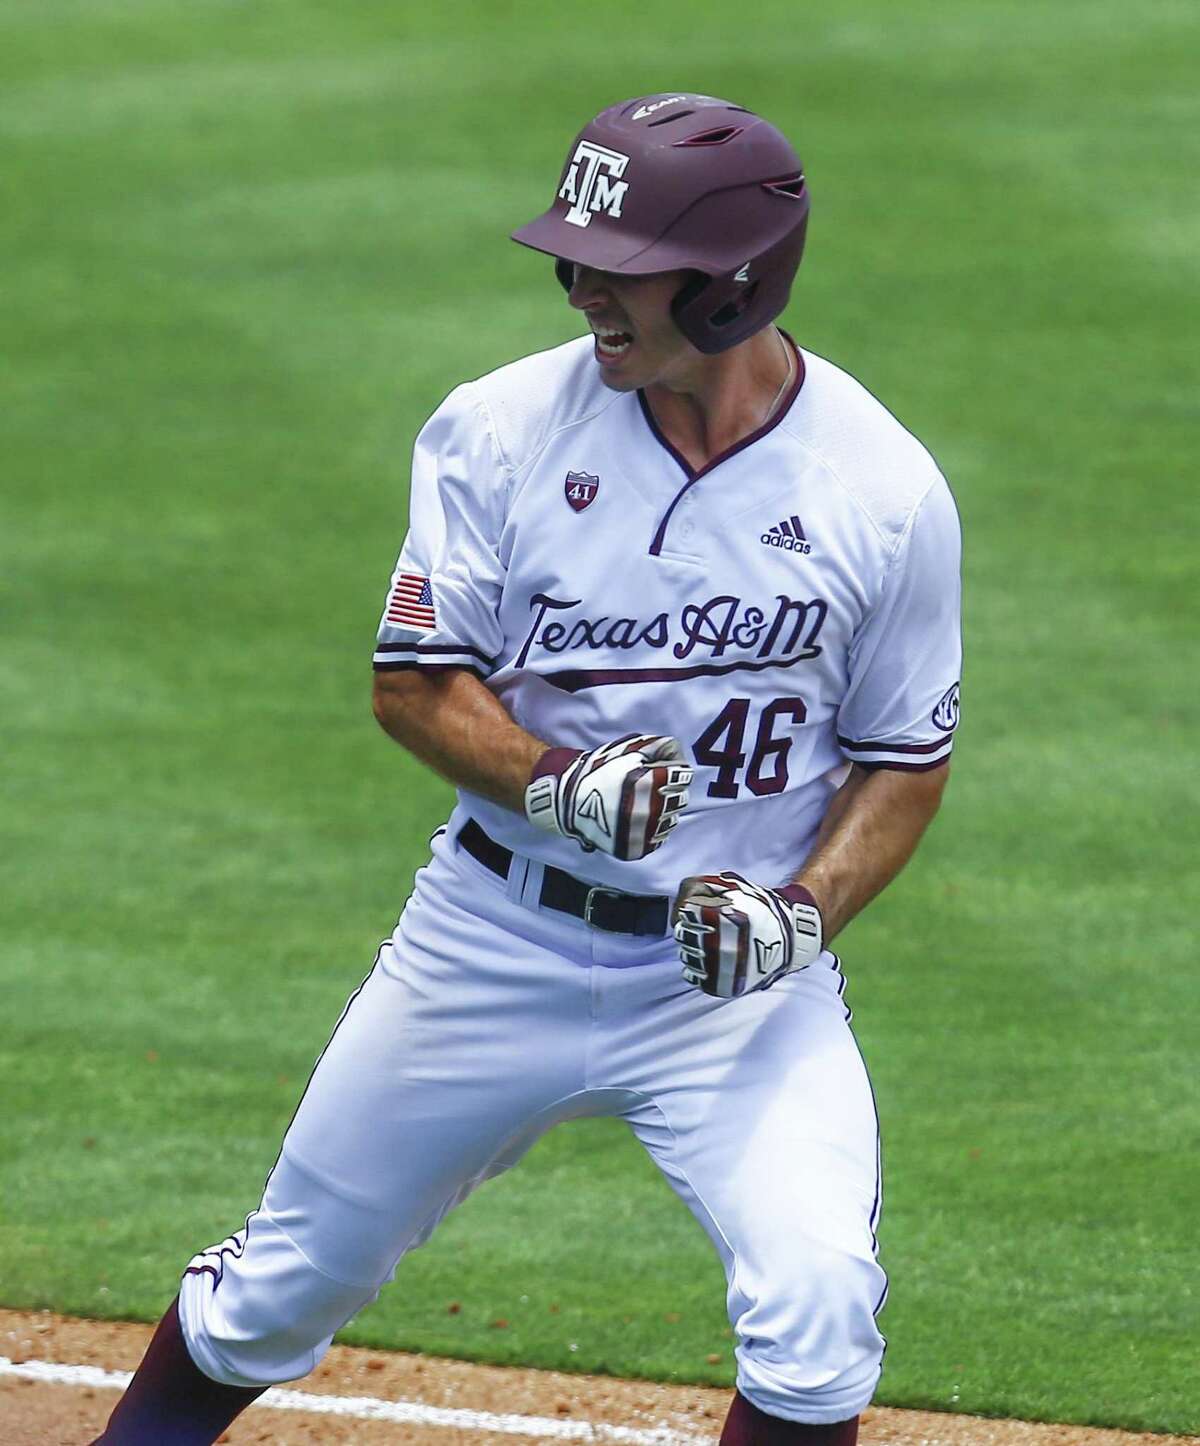 Texas A&M's Jonathan Ducoff reacts after hitting a three run homer during the eighth inning of the Southeastern Conference tournament NCAA college baseball game against Florida, Tuesday, May 21, 2019, in Birmingham, Ala. (AP Photo/Butch Dill)